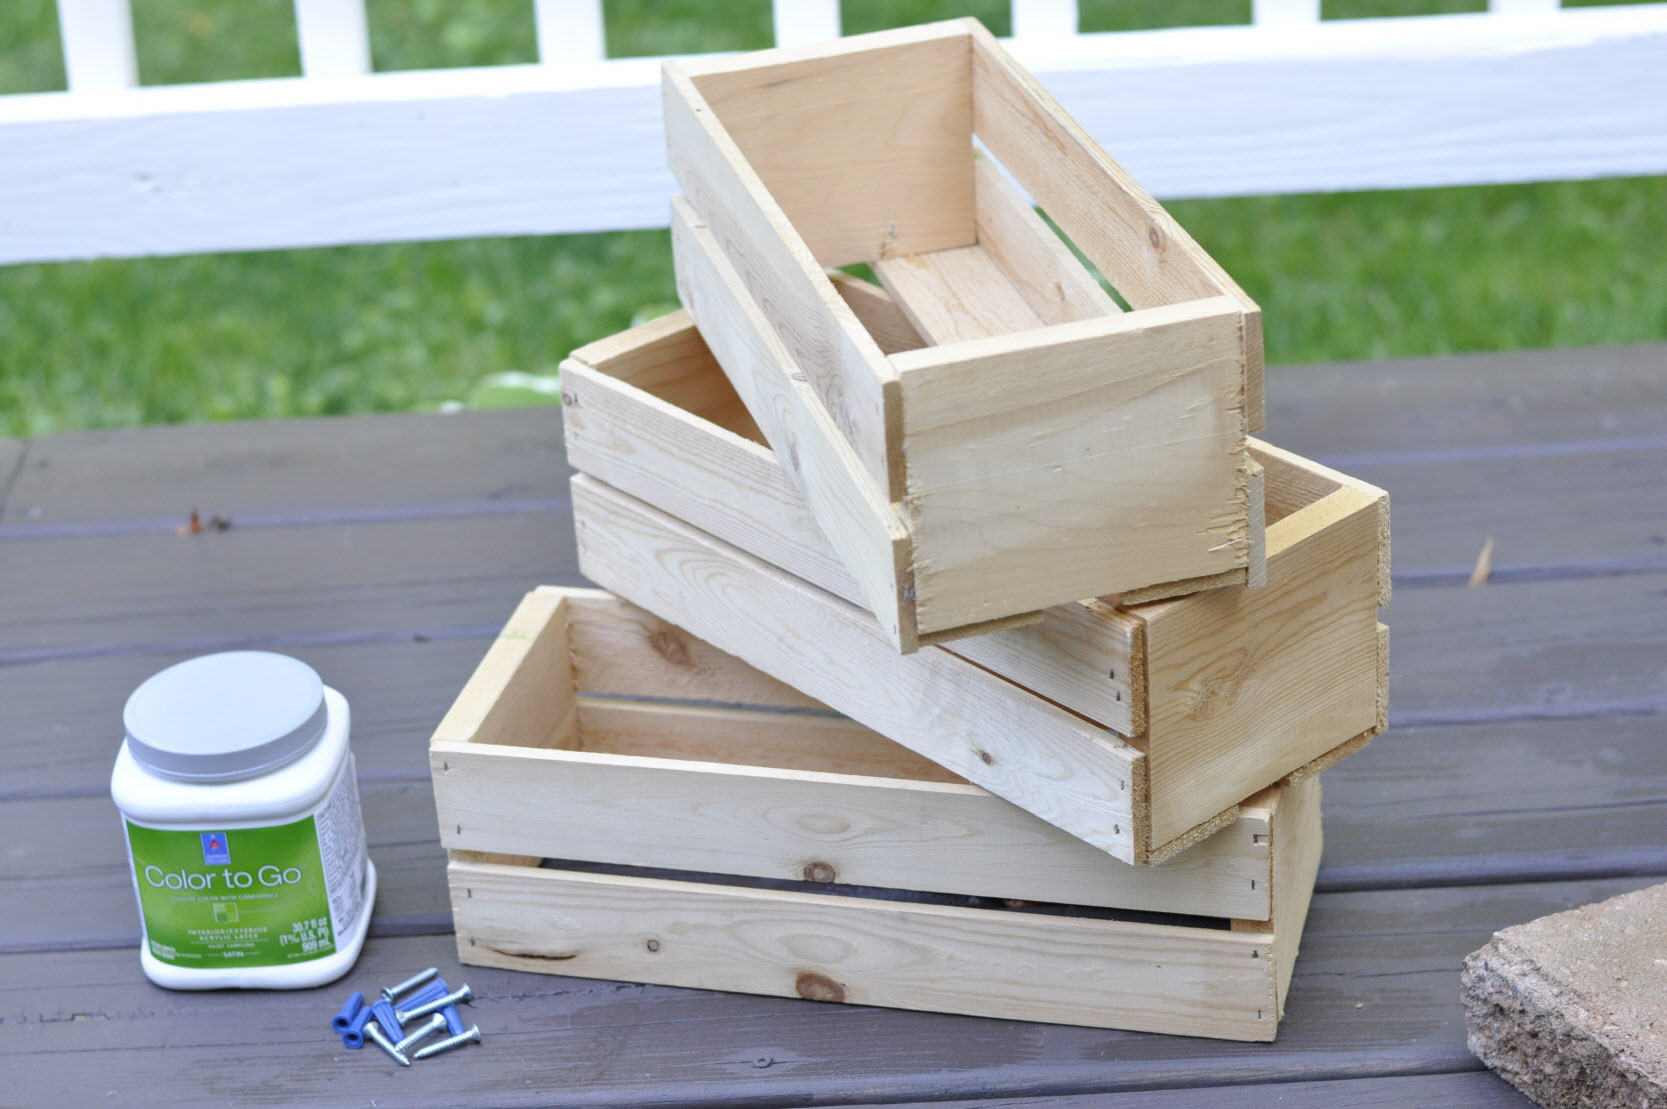 DIY Wooden Crates
 5 DIY projects using wooden crates